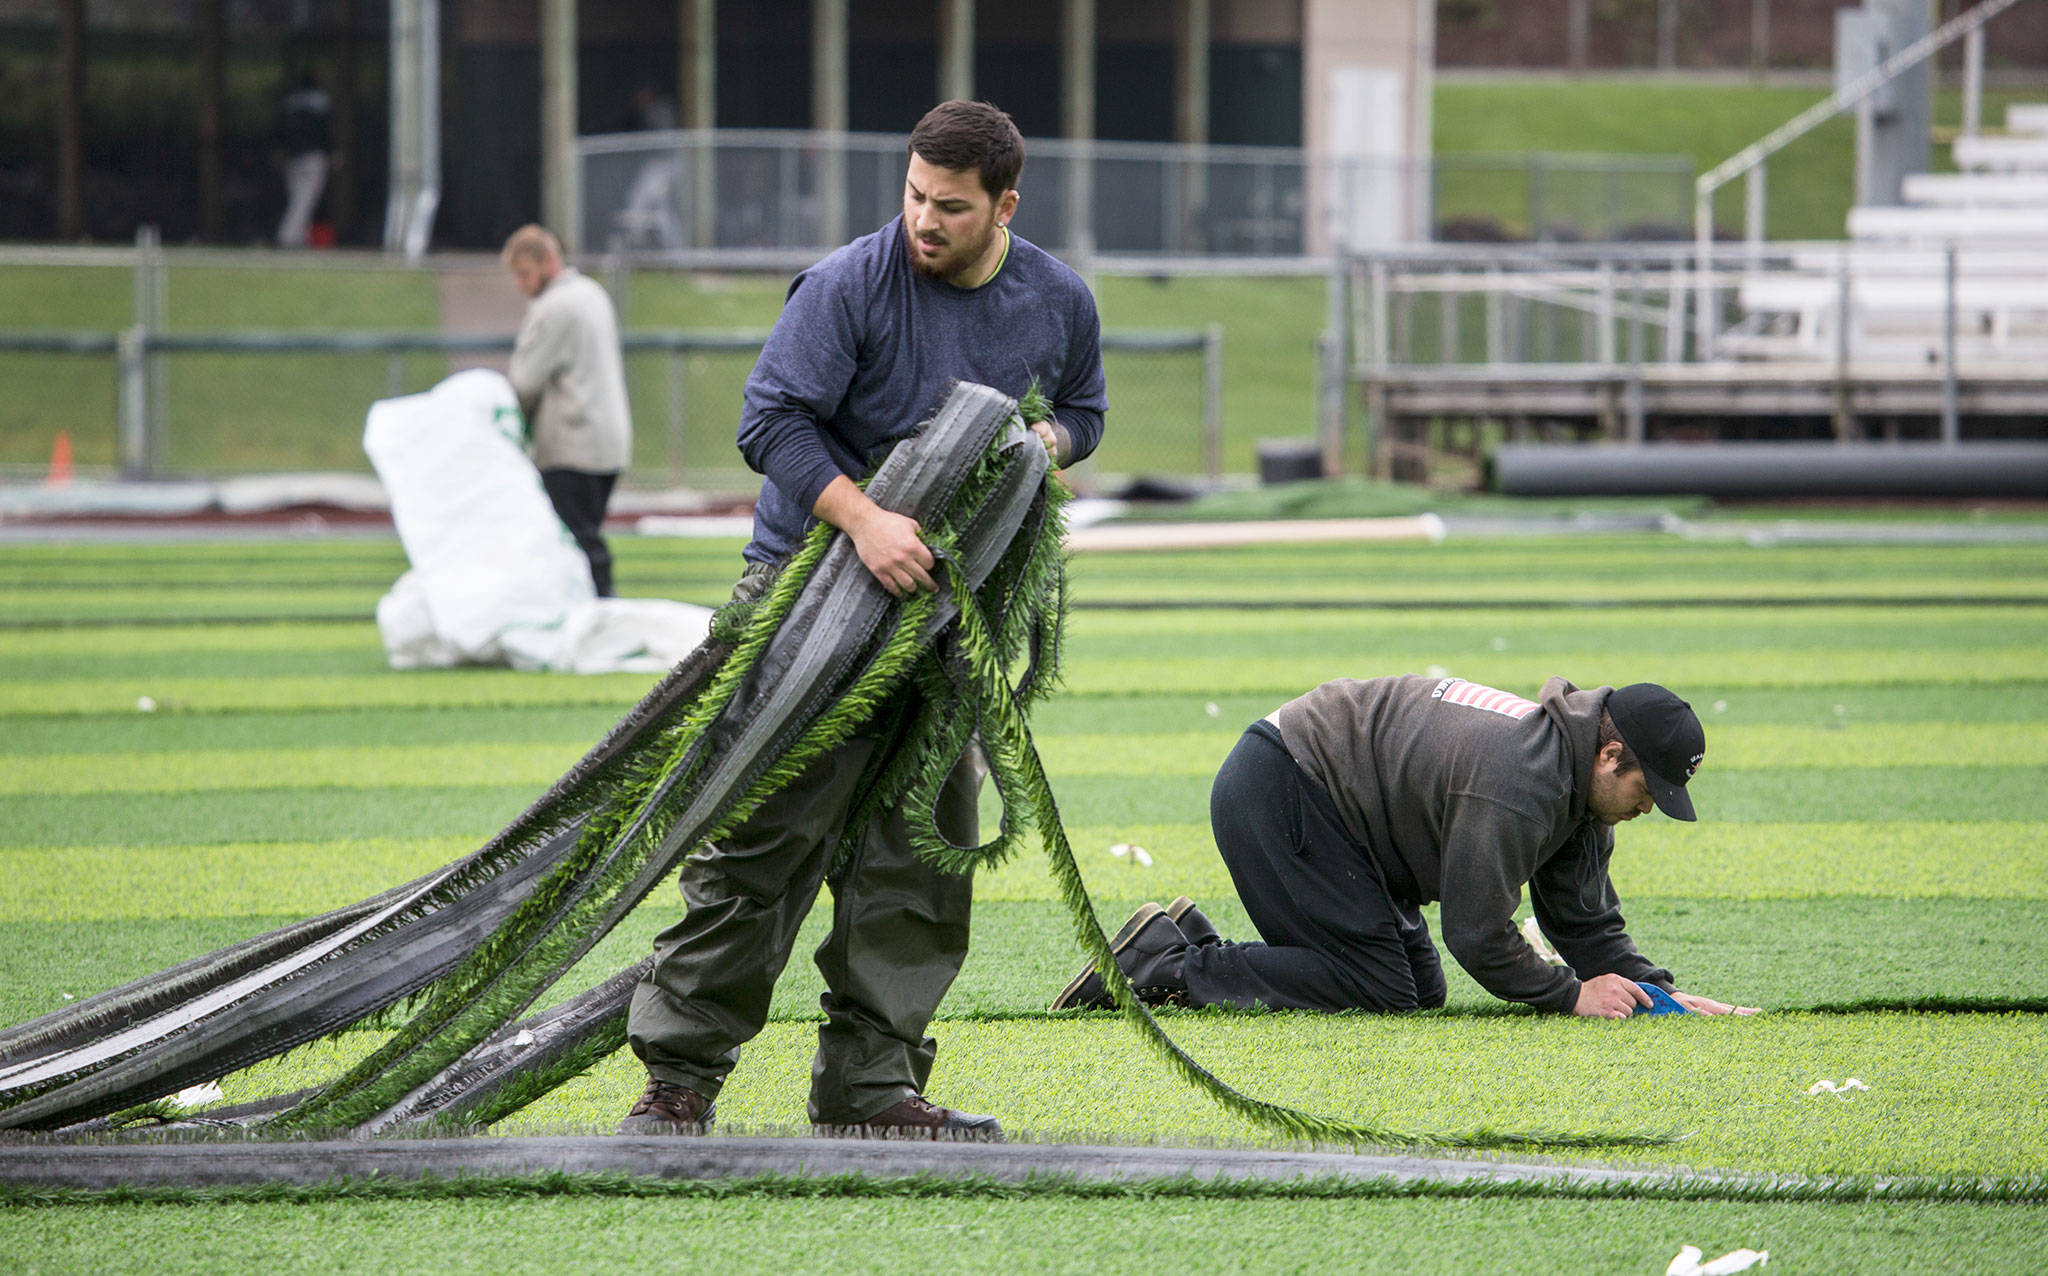 Coast to Coast Turf employee Isaiah Nogueira (center) pulls up turf cut by Tyler Kellogg (right) as Justin Conner Buchanan bags scraps. The three men were part of crew installing a new turf field at Everett Memorial Stadium on Friday. (Andy Bronson / The Herald)